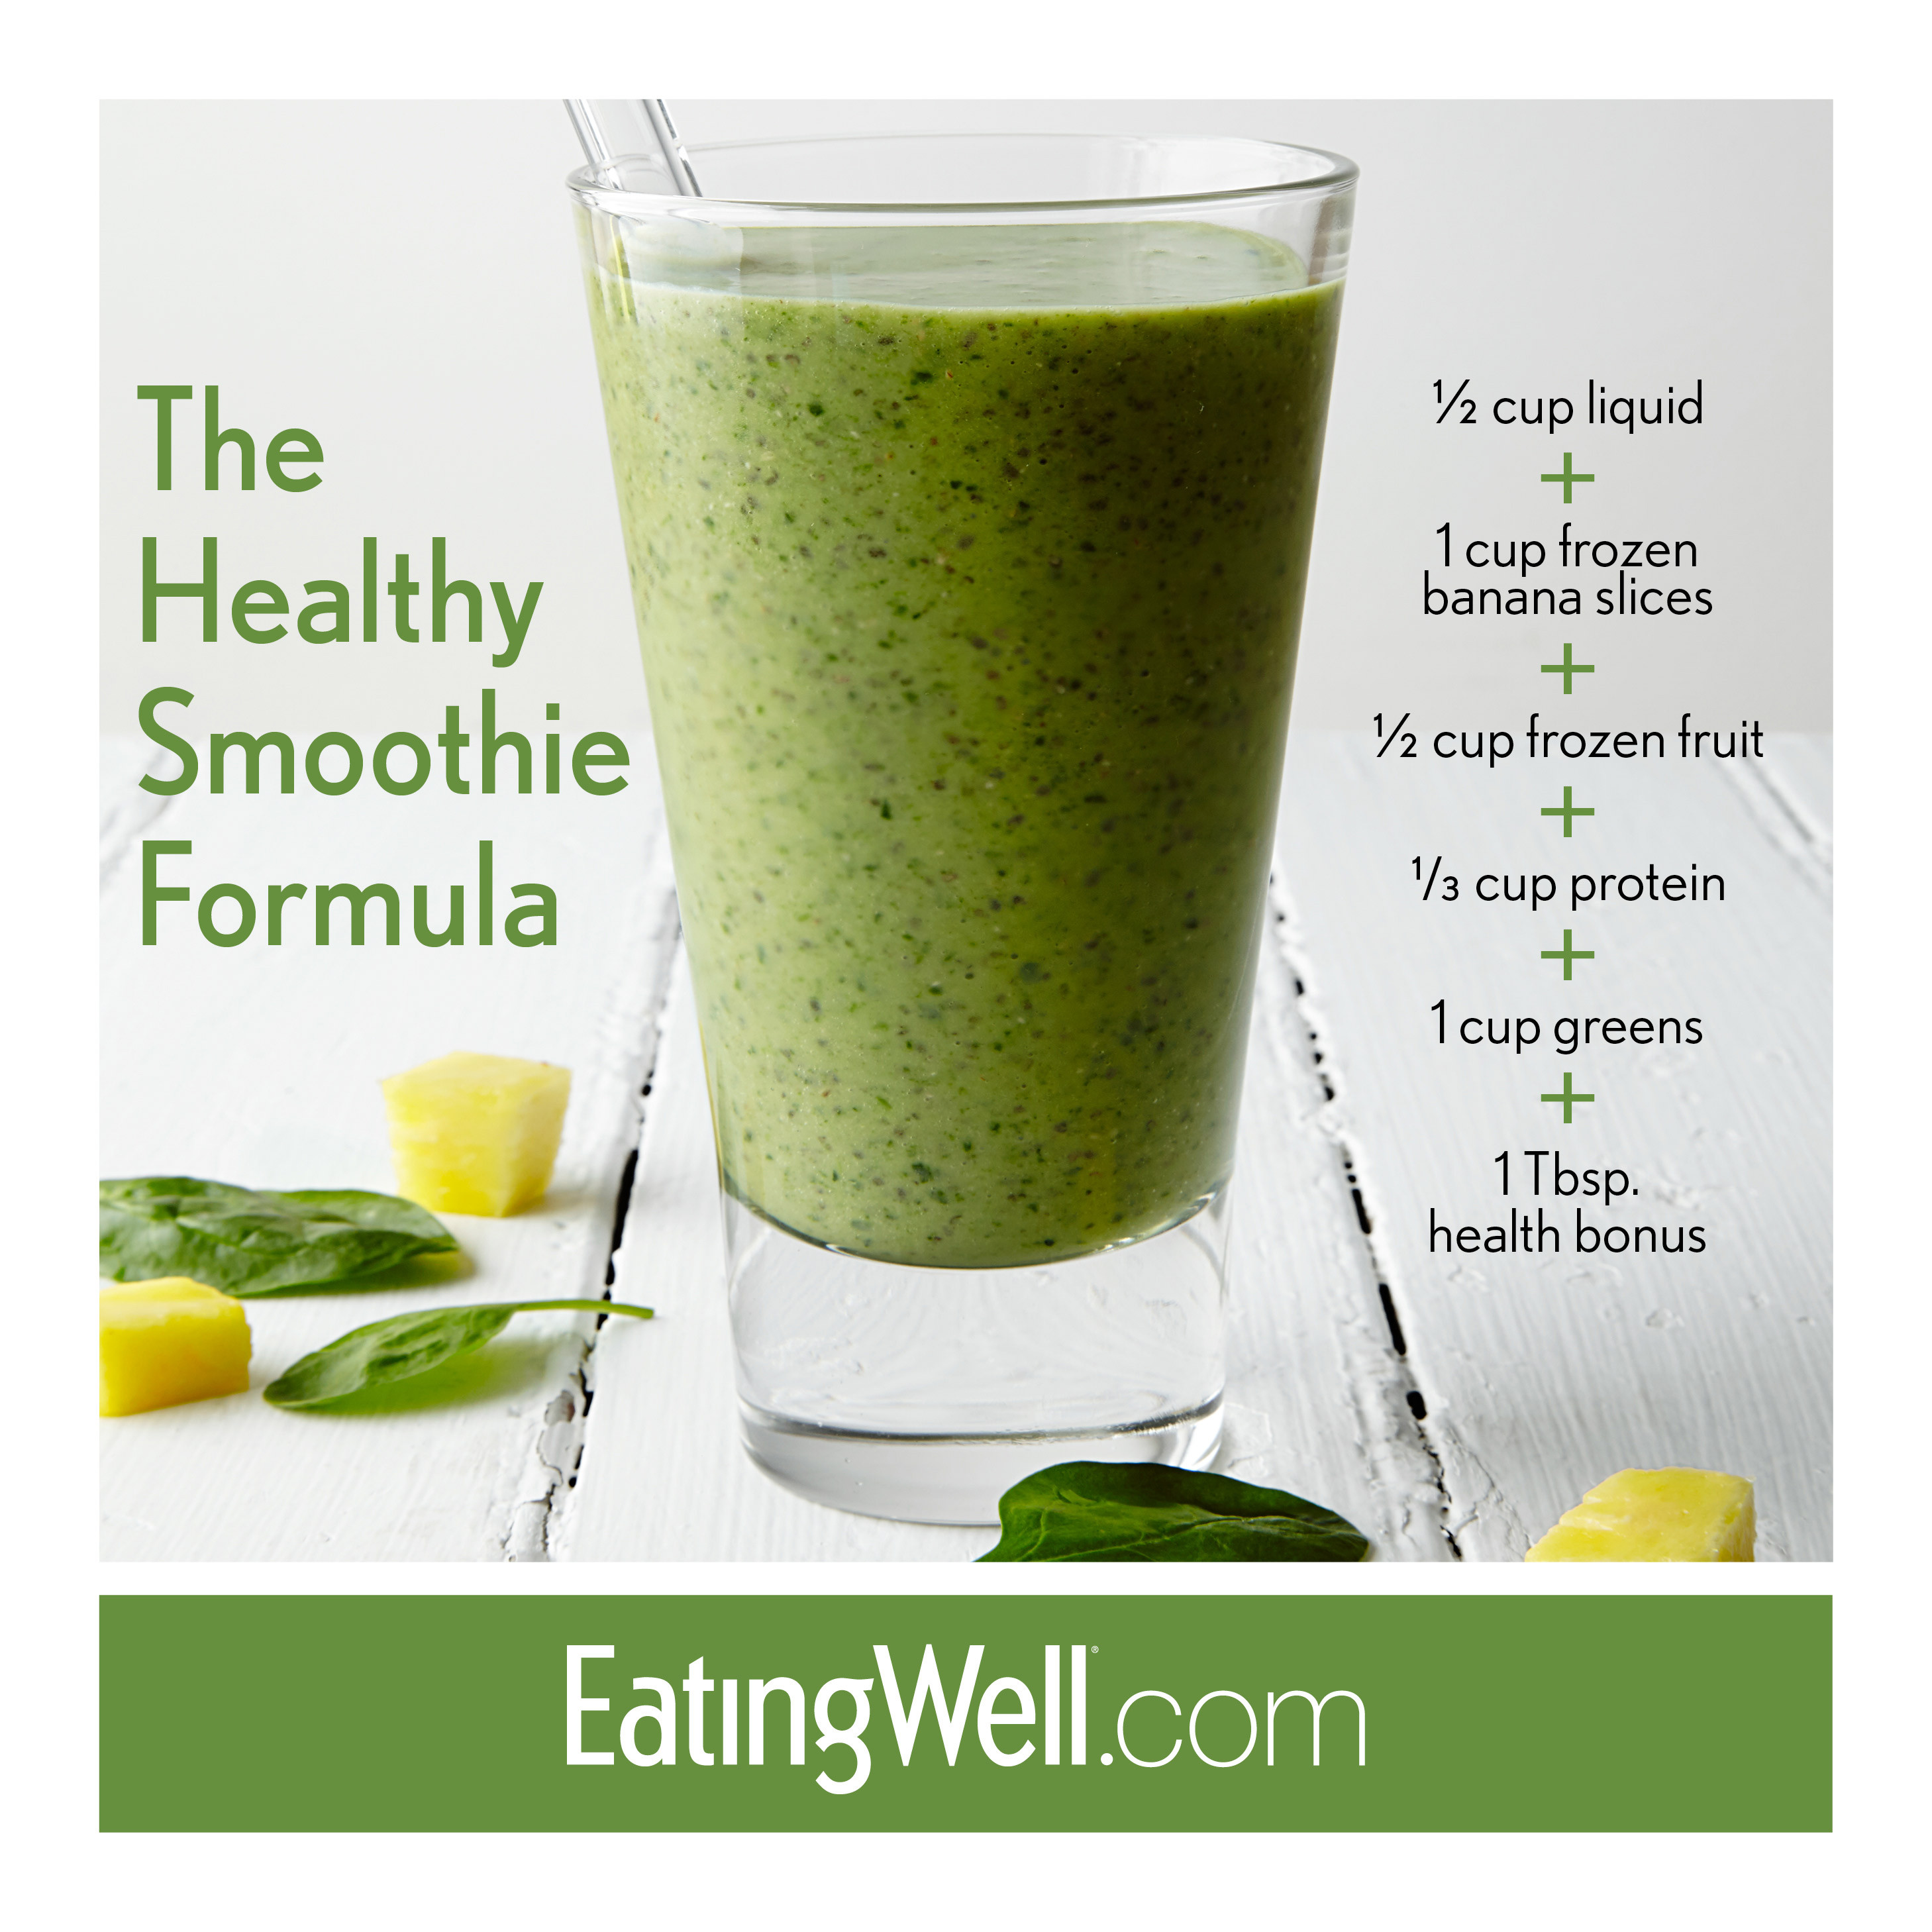 Healthy Veggie Smoothie Recipes
 The Ultimate Green Smoothie Recipe EatingWell